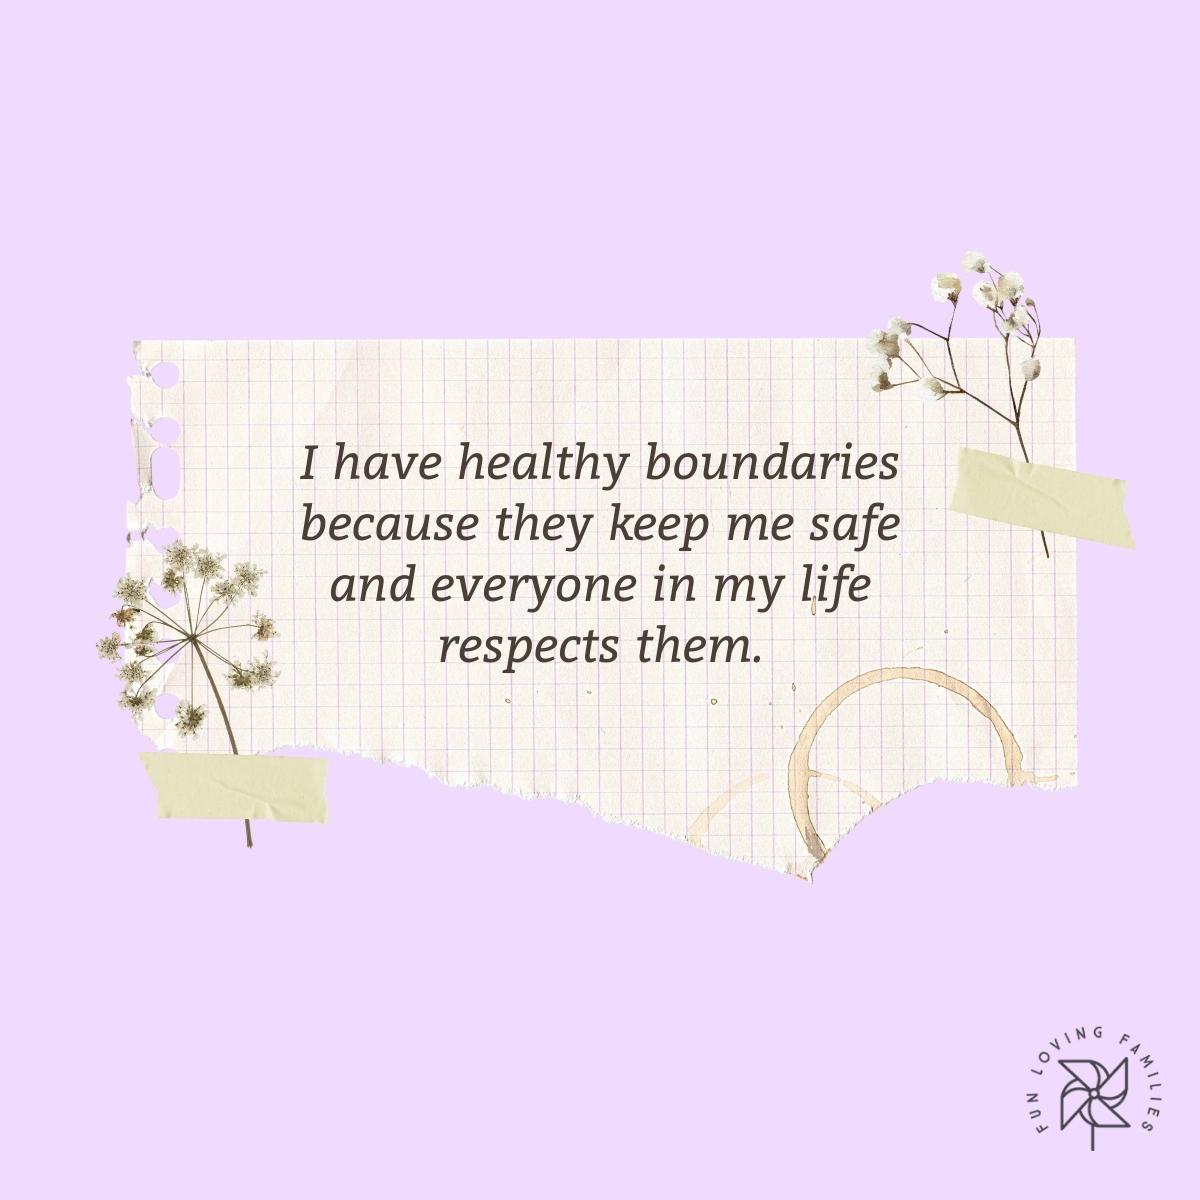 I have healthy boundaries because they keep me safe and everyone in my life respects them affirmation image